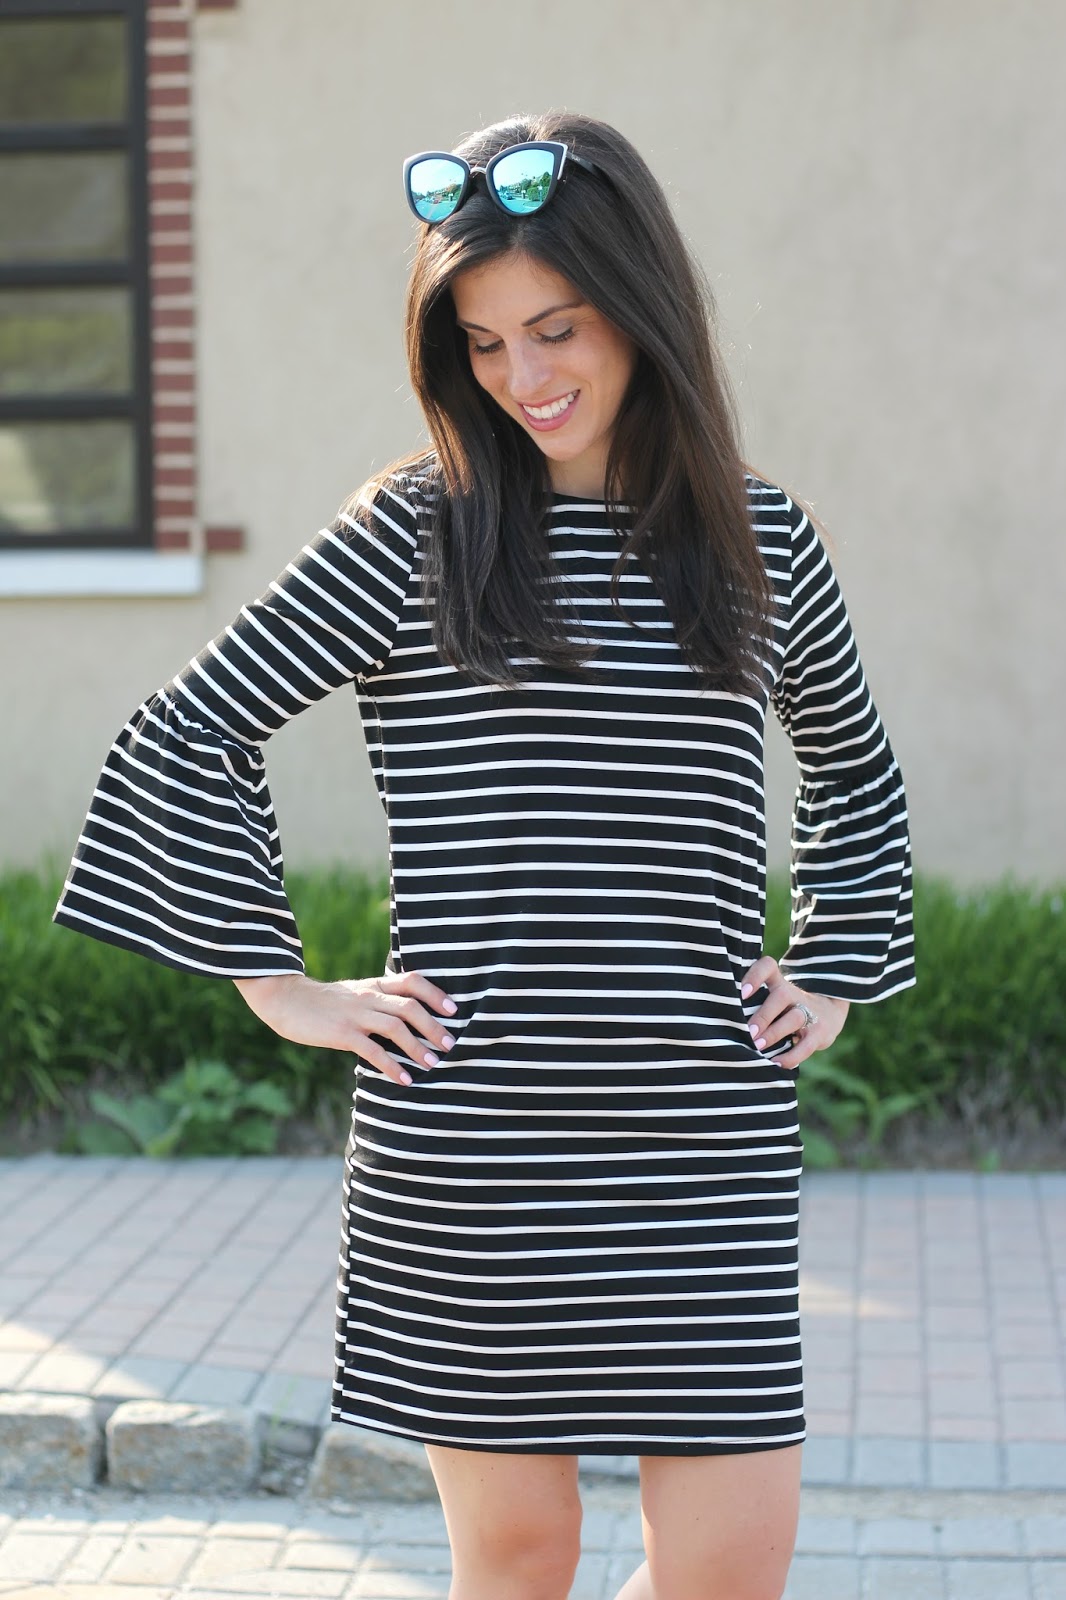 Beautifully Candid: Striped Bell Sleeve Dress and an Added Bonus With ...